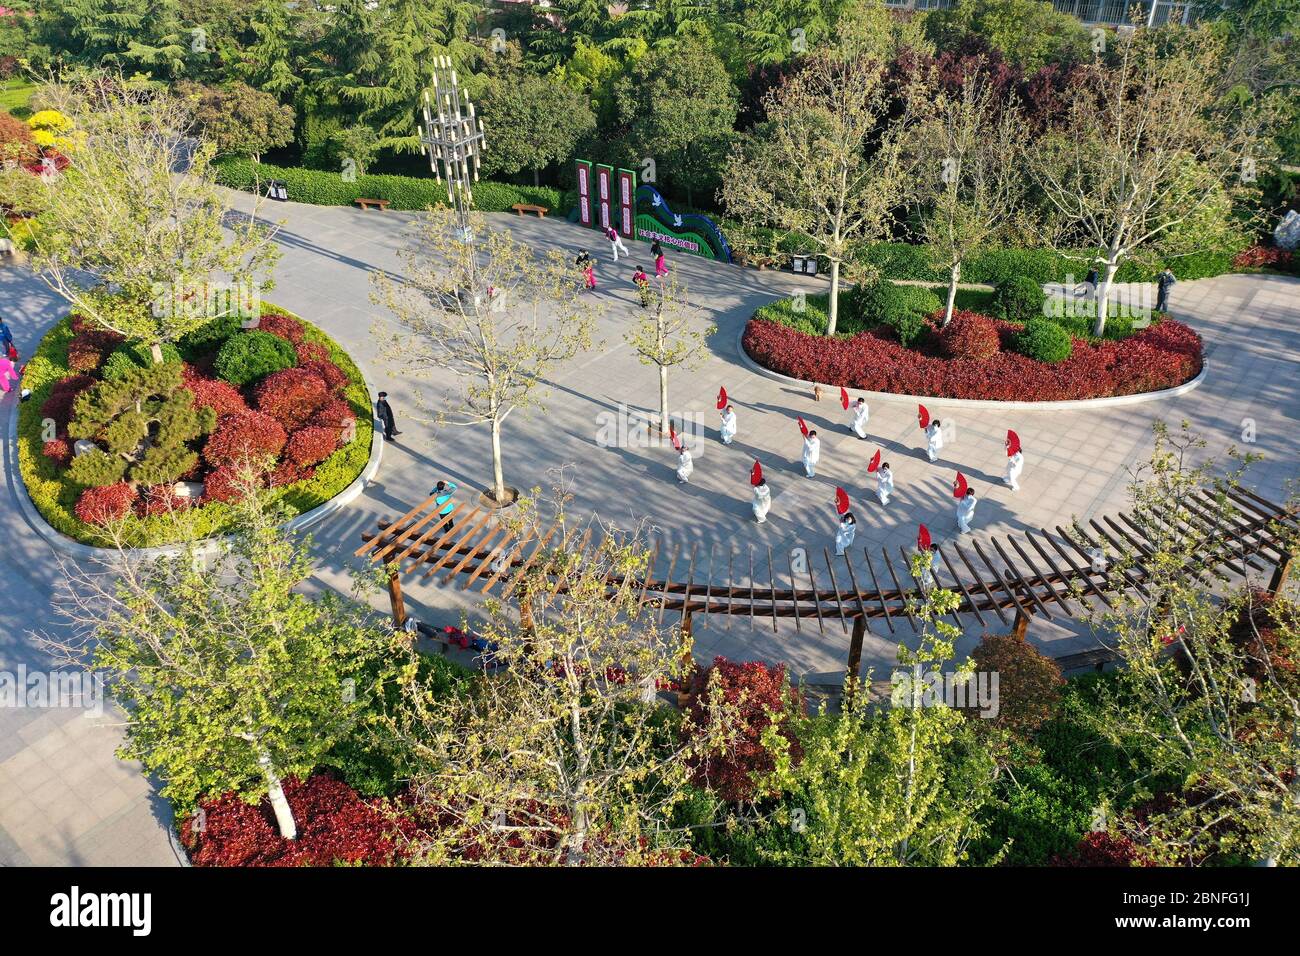 an-aerial-view-of-people-walking-in-a-mini-park-in-qingdao-city-east-chinas-shandong-province-22-april-2020-mini-parks-were-built-in-qingdao-cit-2BNFG1J.jpg